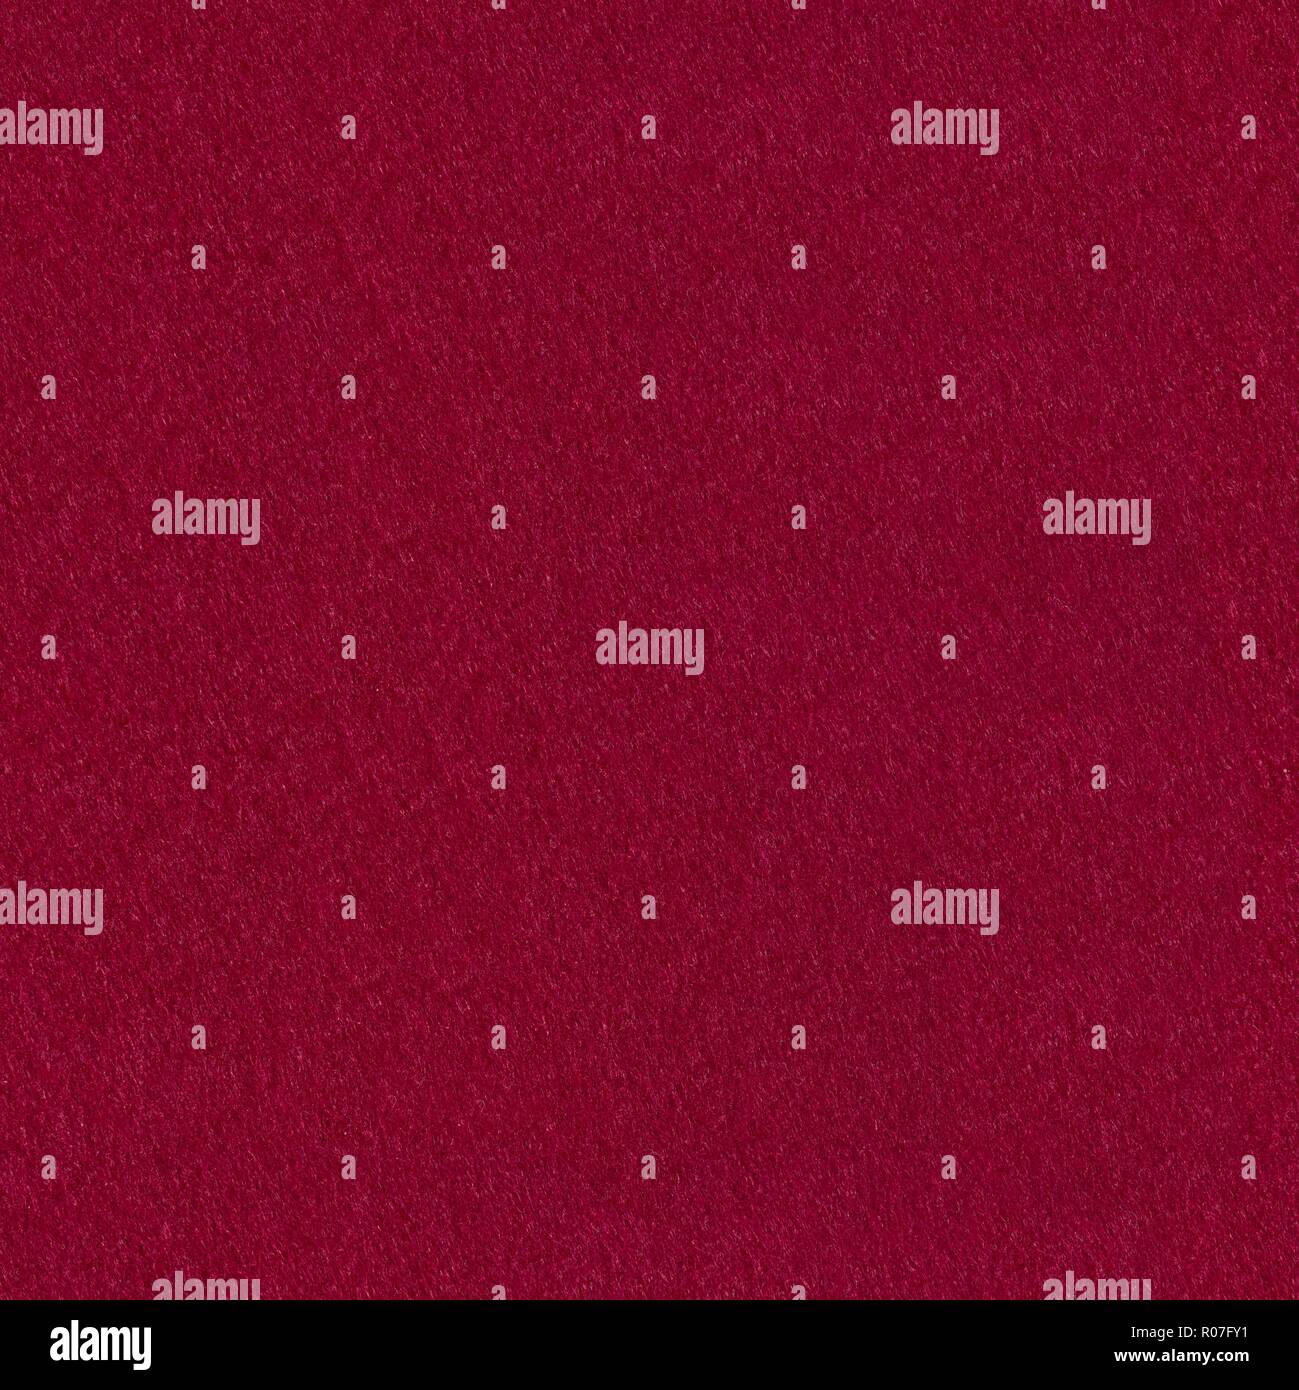 The red carpet background. Seamless square texture, tile ready.  Stock Photo